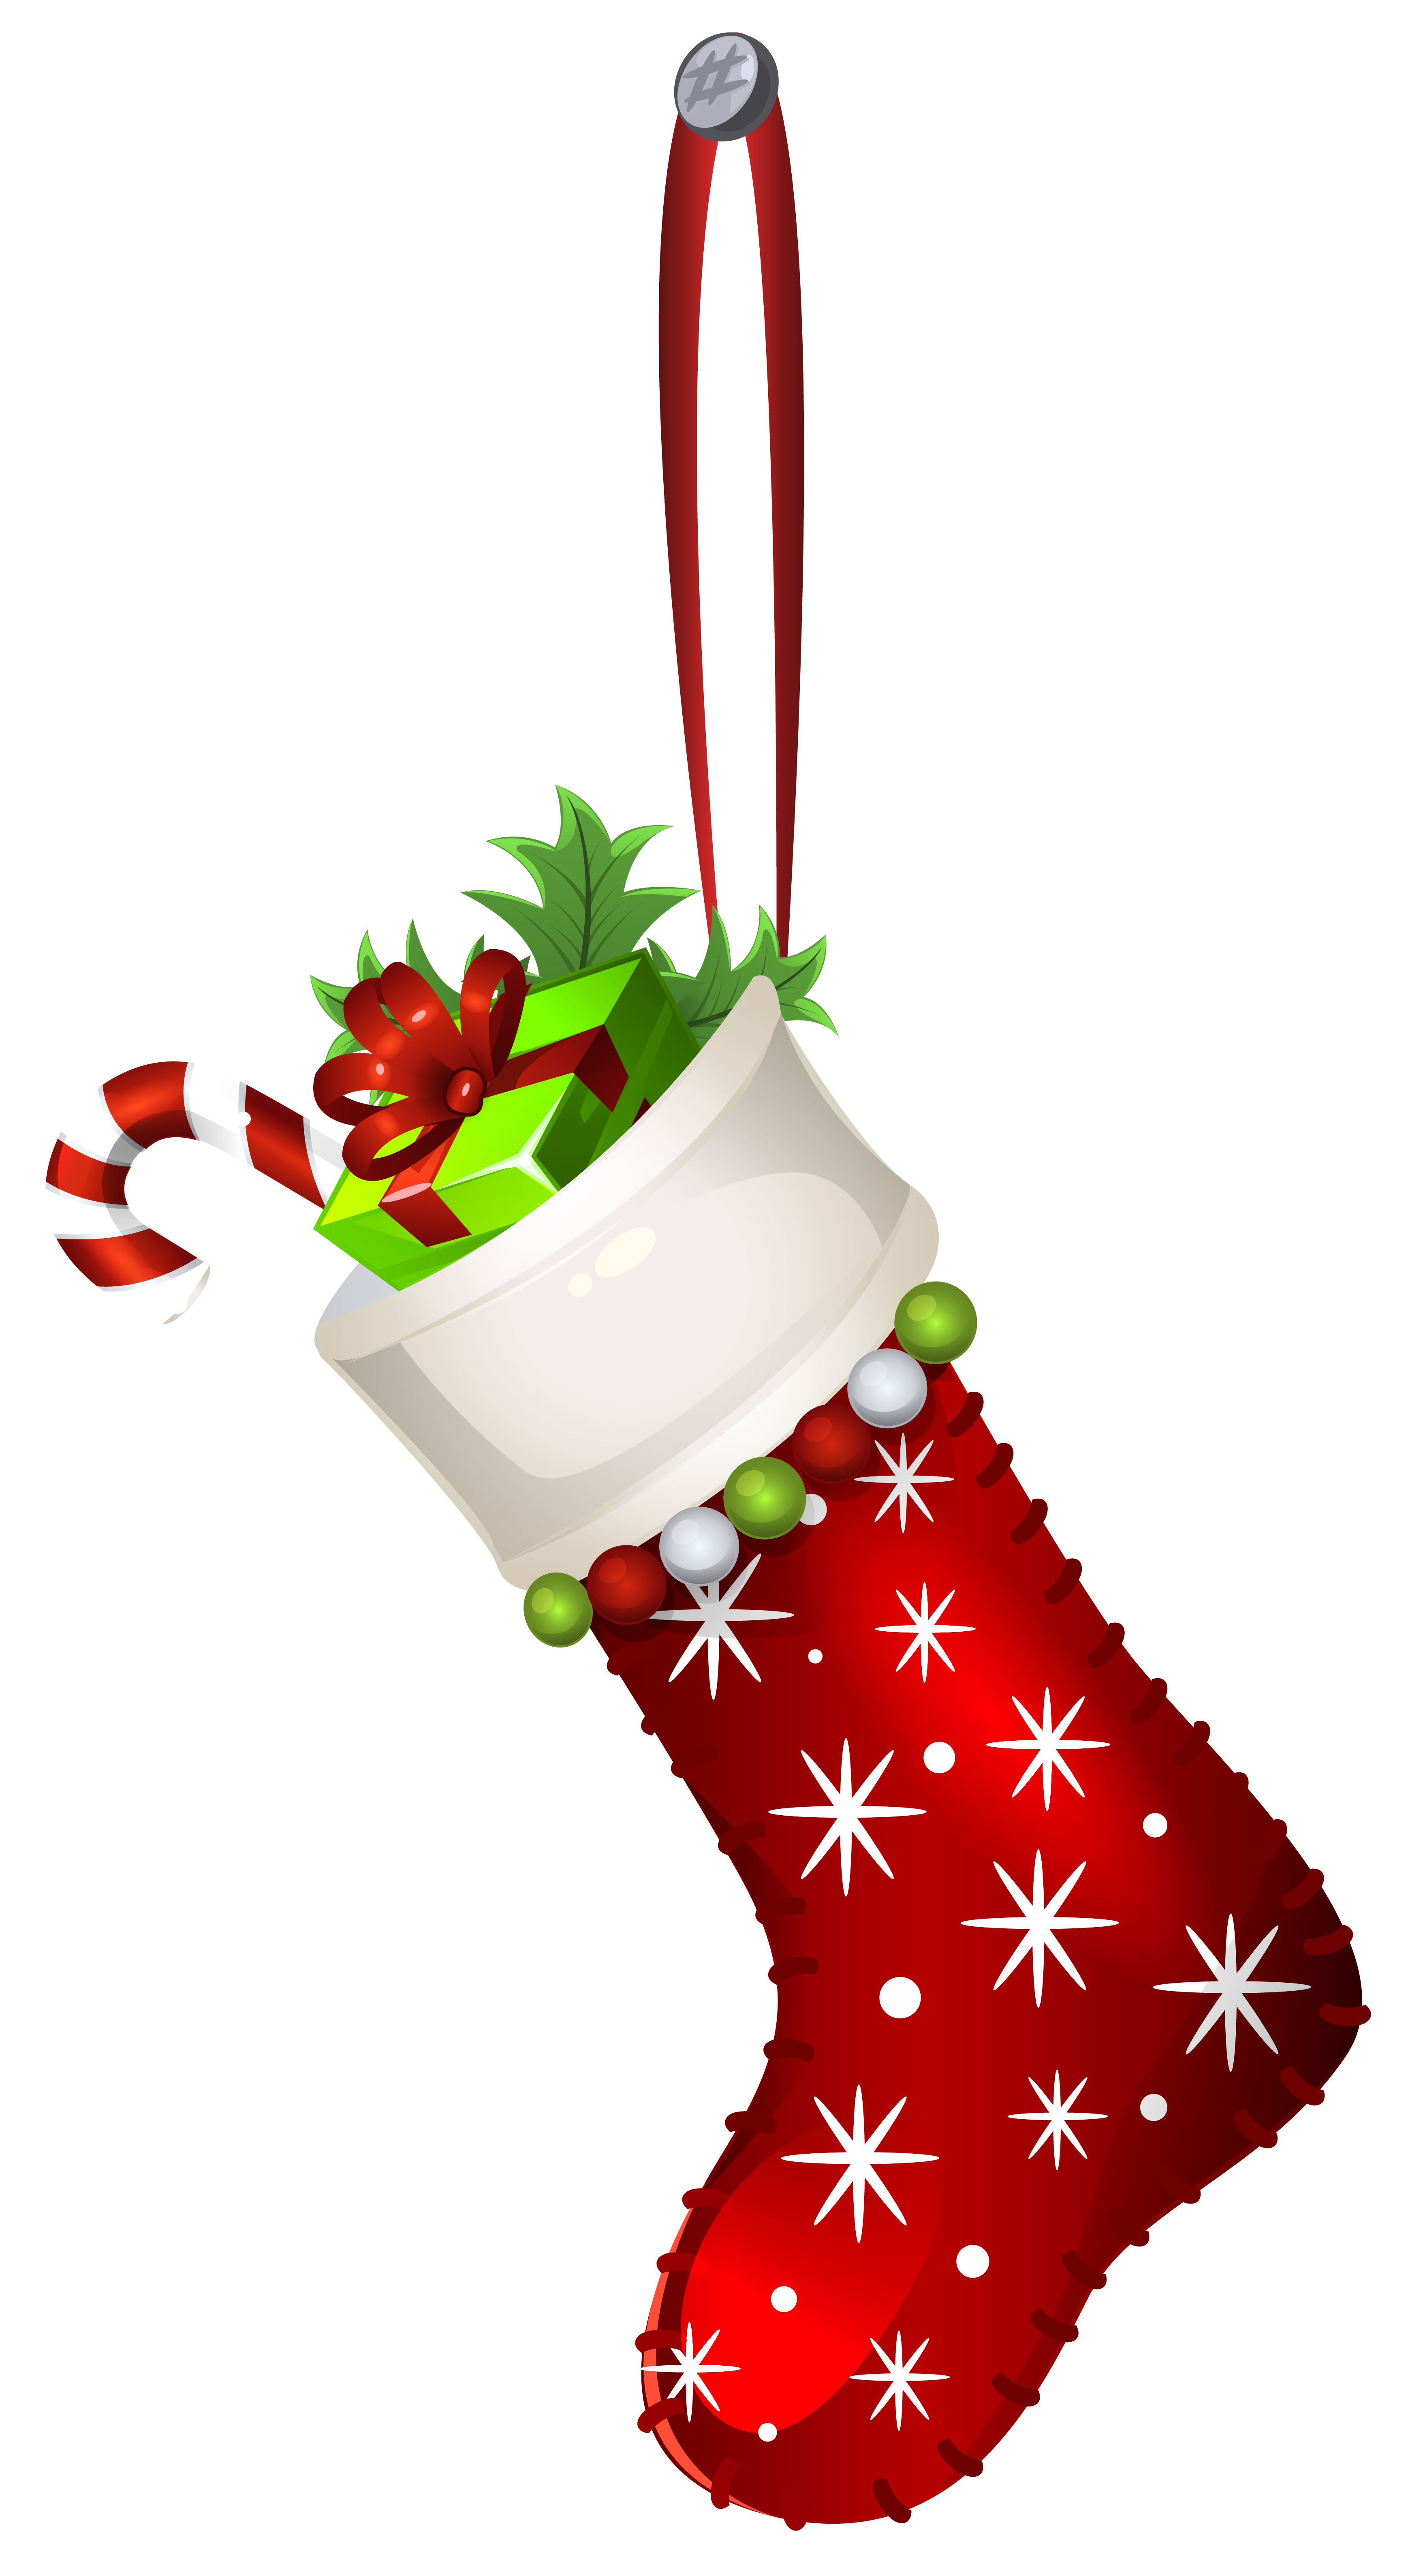 Words clipart candy. Image result for christmas